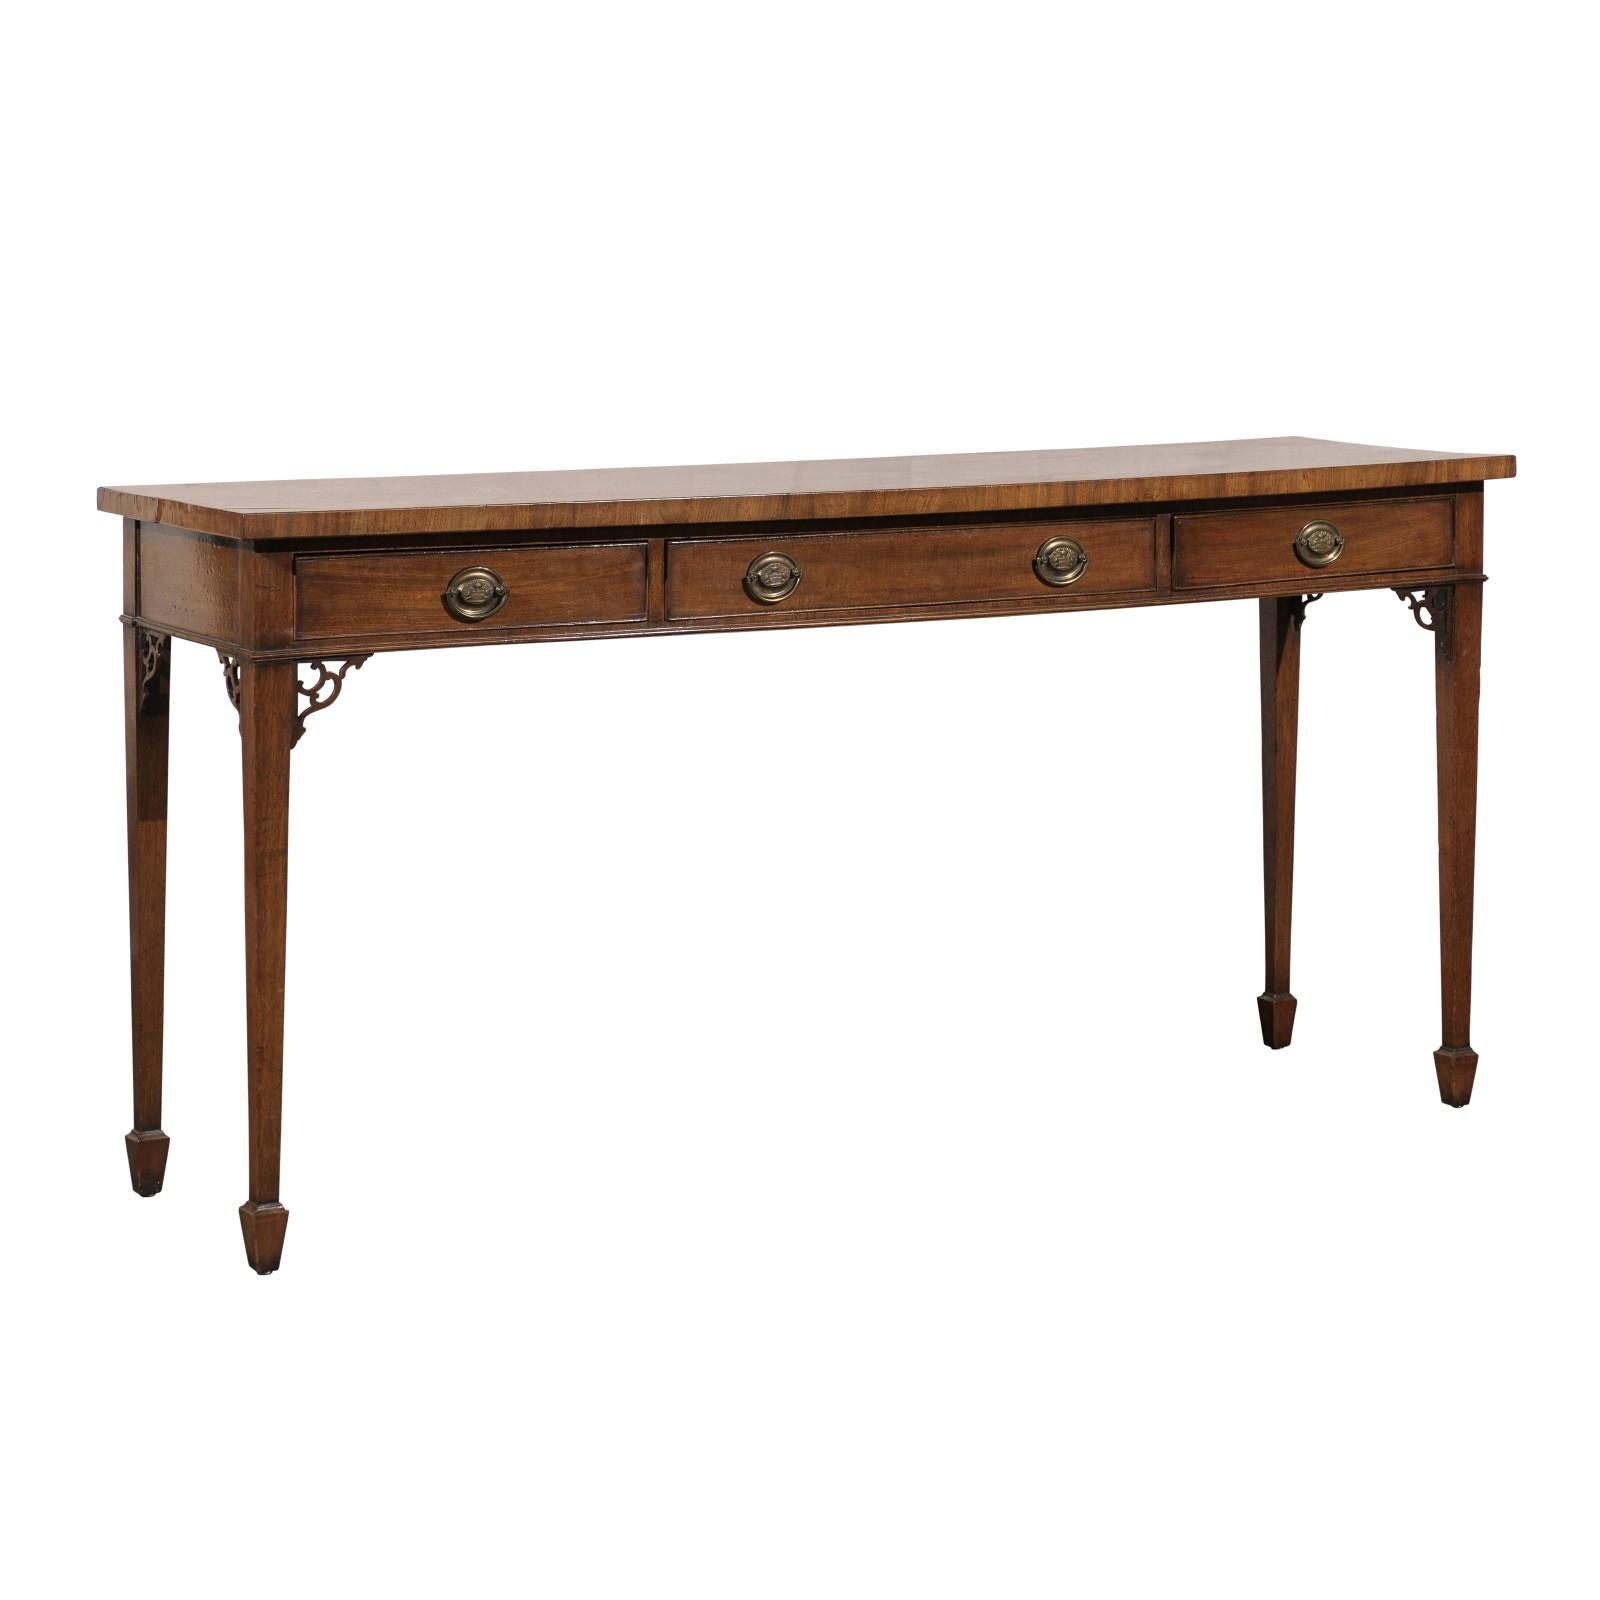 18th-19th Century Georgian Mahogany Three-Drawer Serving Console Table
Fretwork brackets at corners, Brass pulls
Beautiful color & patina 